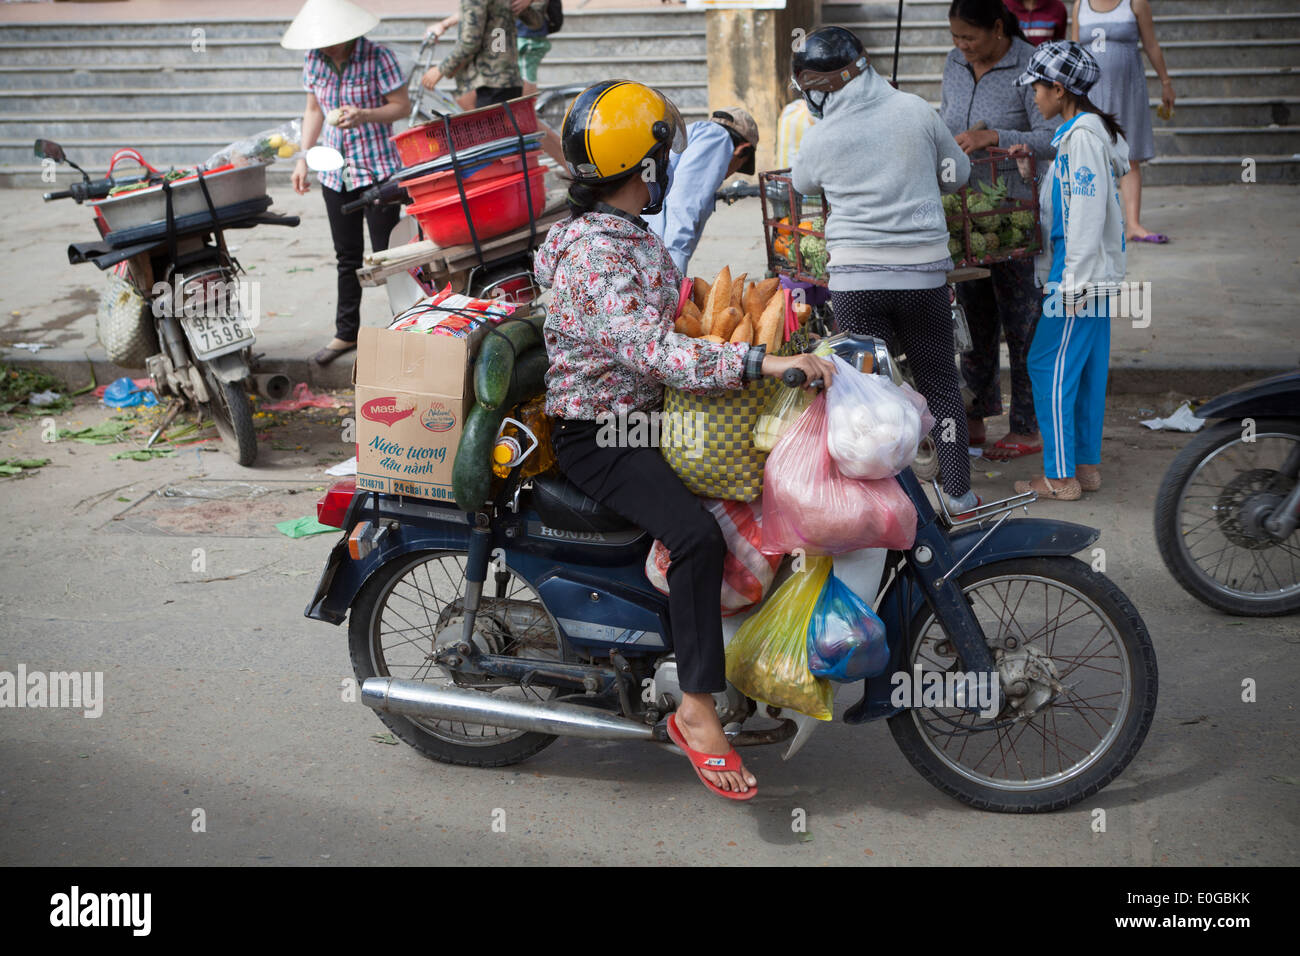 Loaded Motorbike at Market in Old Town Hoi An Vietnam Stock Photo